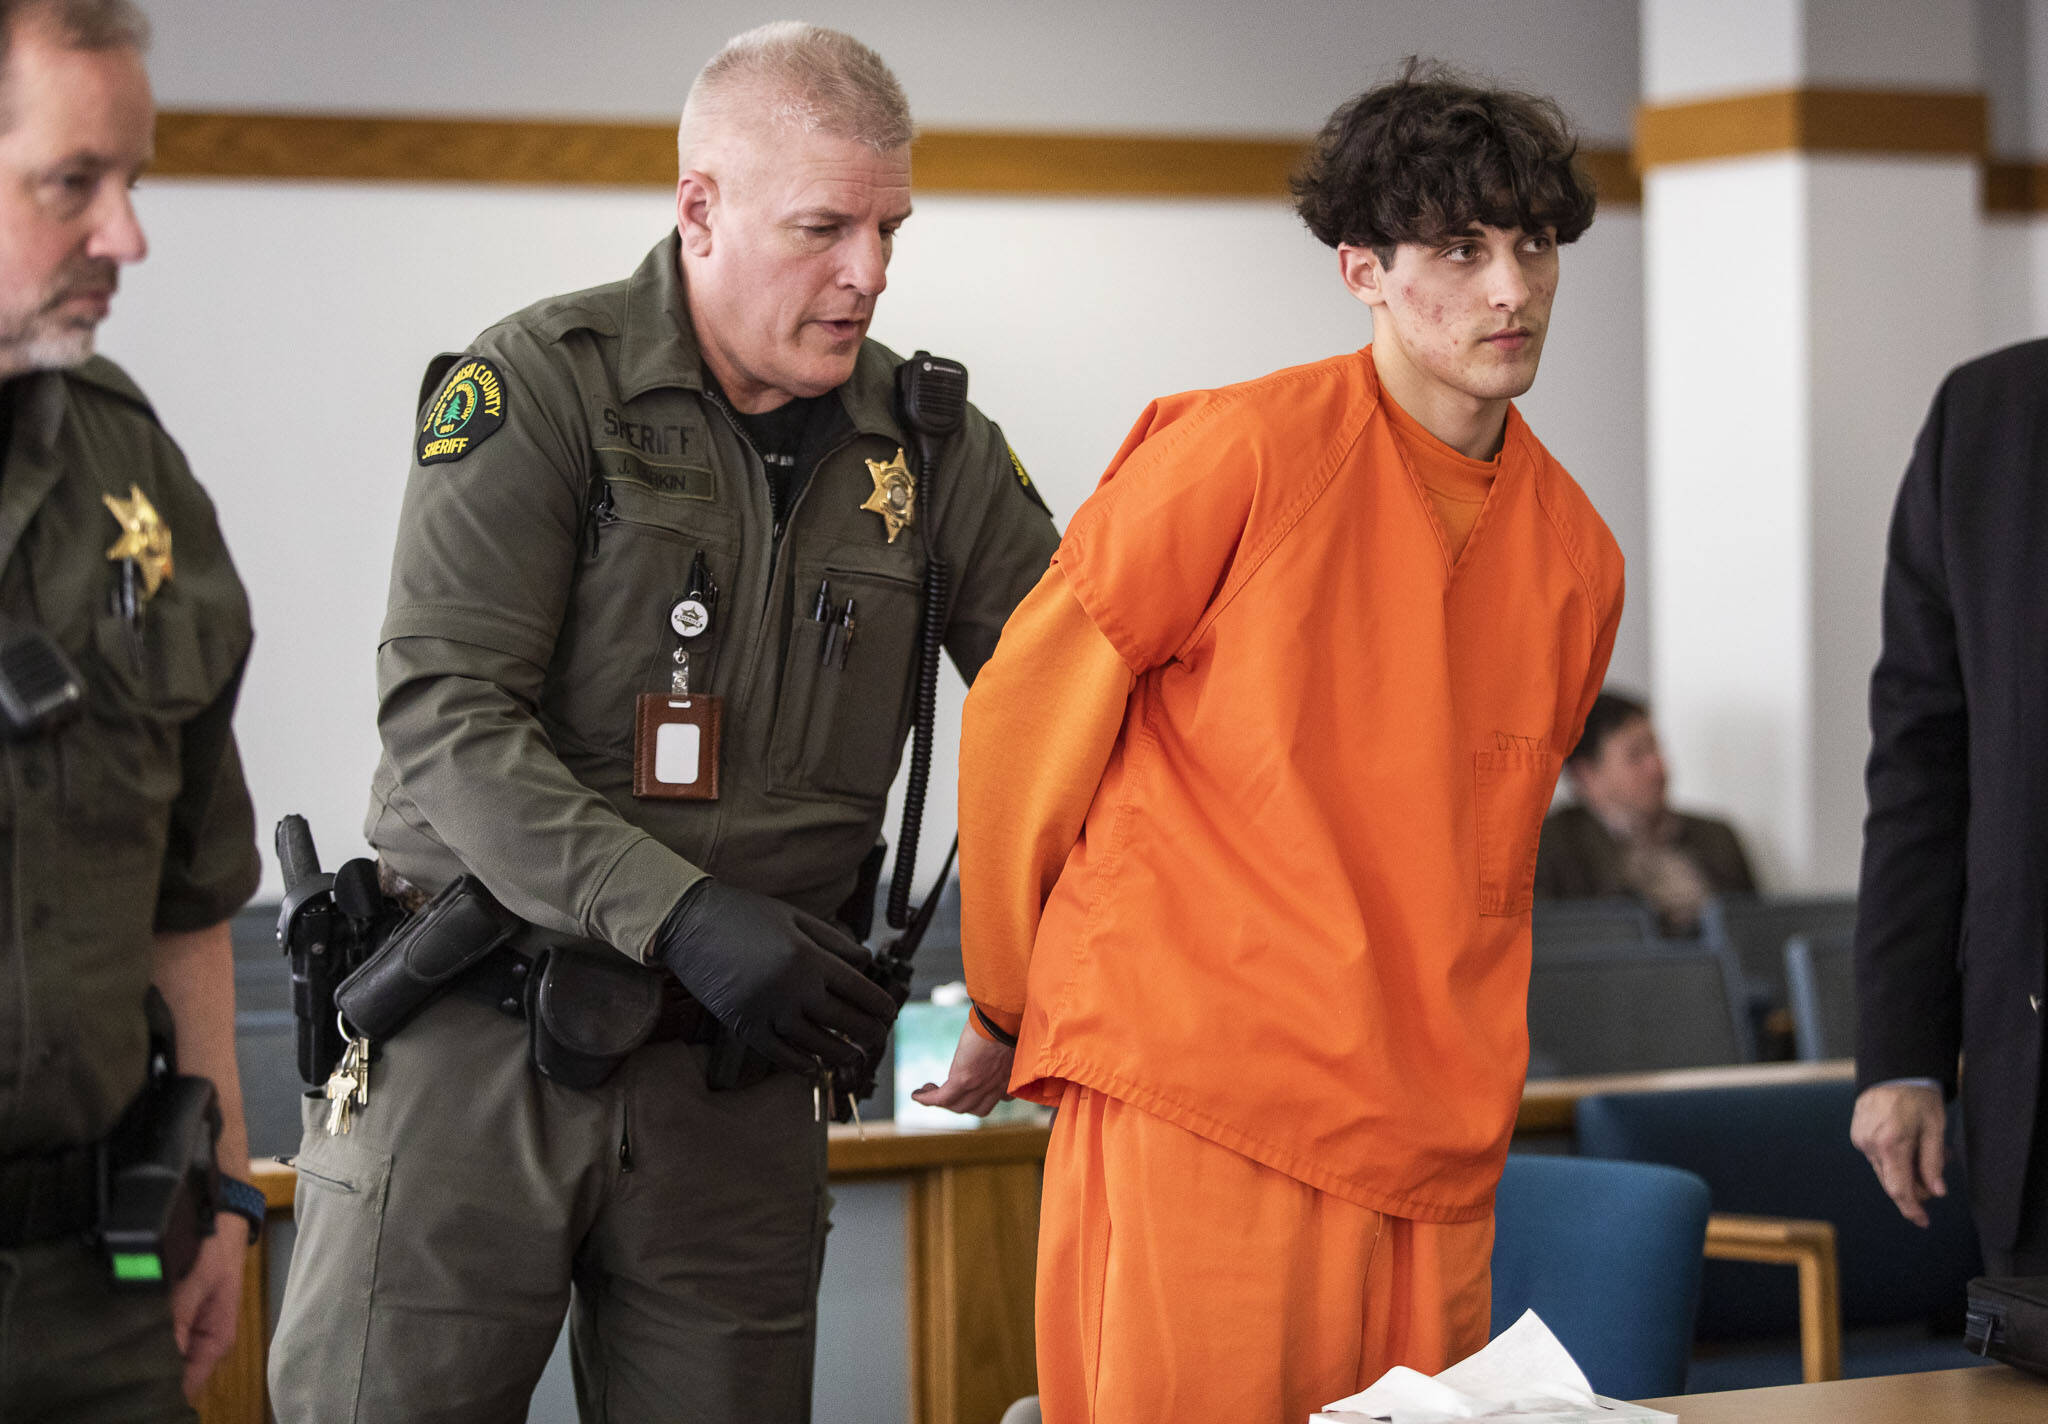 Dominic Wilson is handcuffed Wednesday after his sentencing for the murder of Andre Hofland at the Snohomish County Courthouse in Everett. (Olivia Vanni / The Herald)